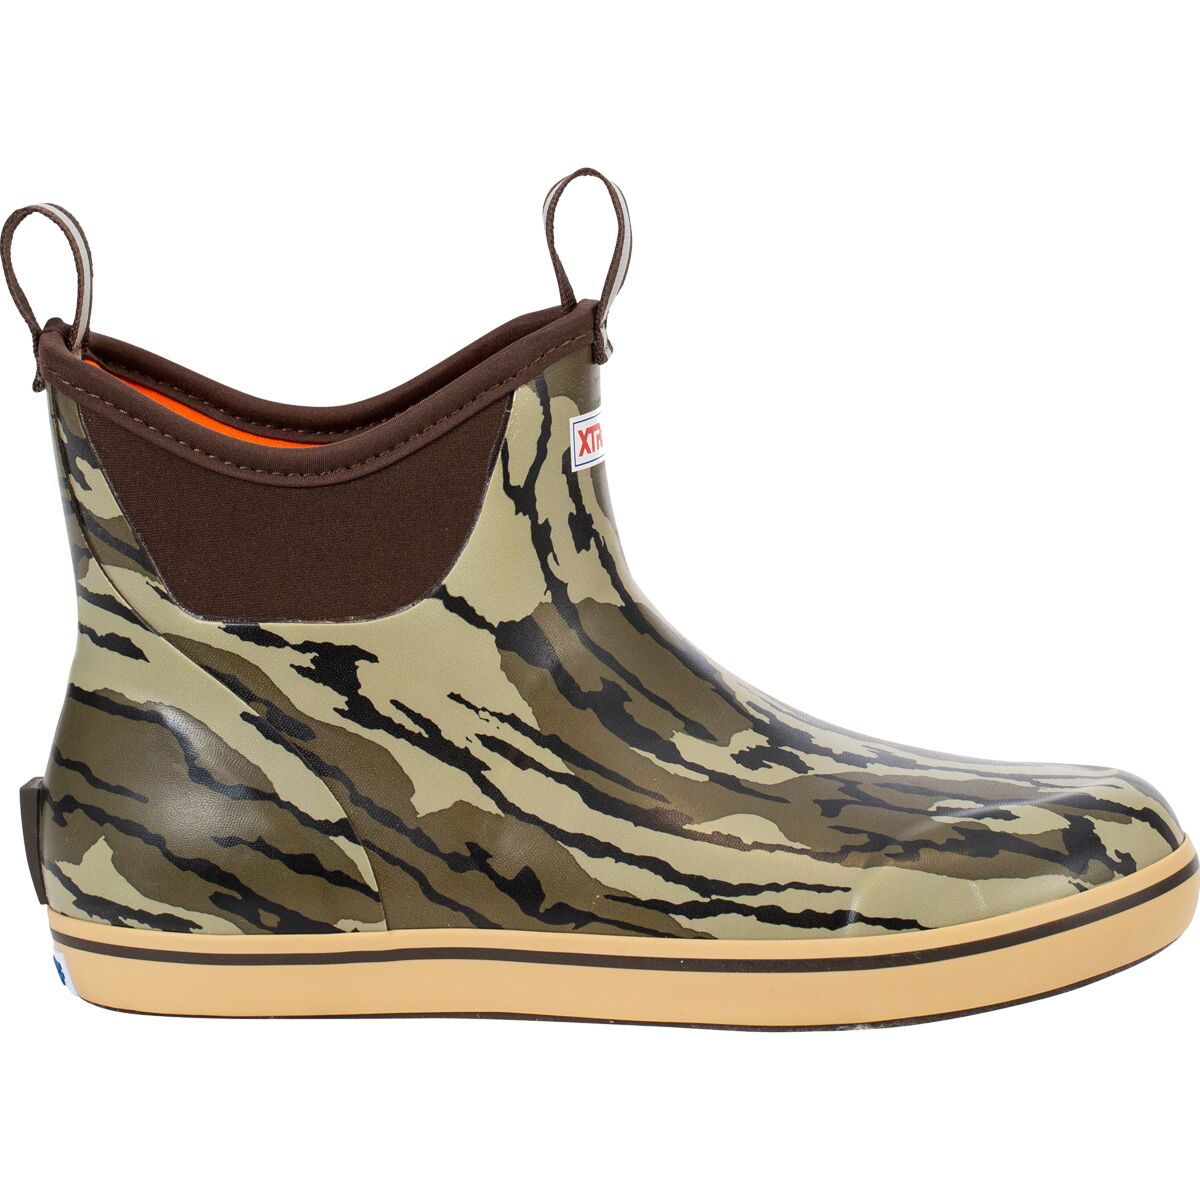 Ankle Deck Printed 6in Boot - Men